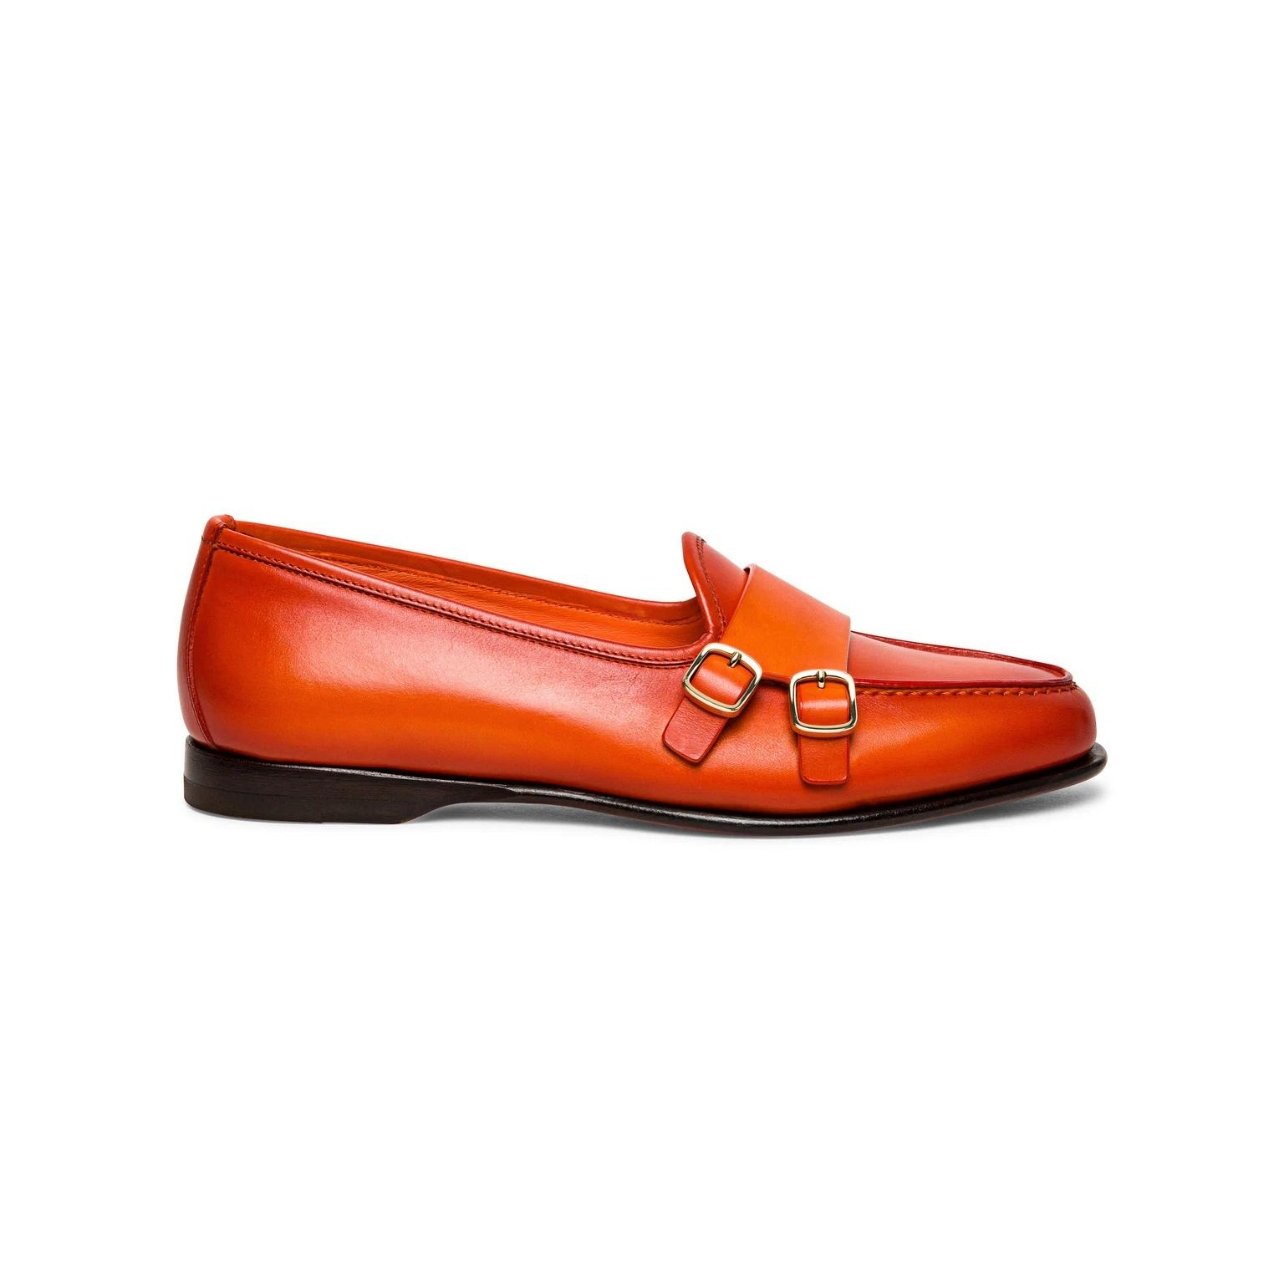 Santoni orange leather loafers with gold double buckle